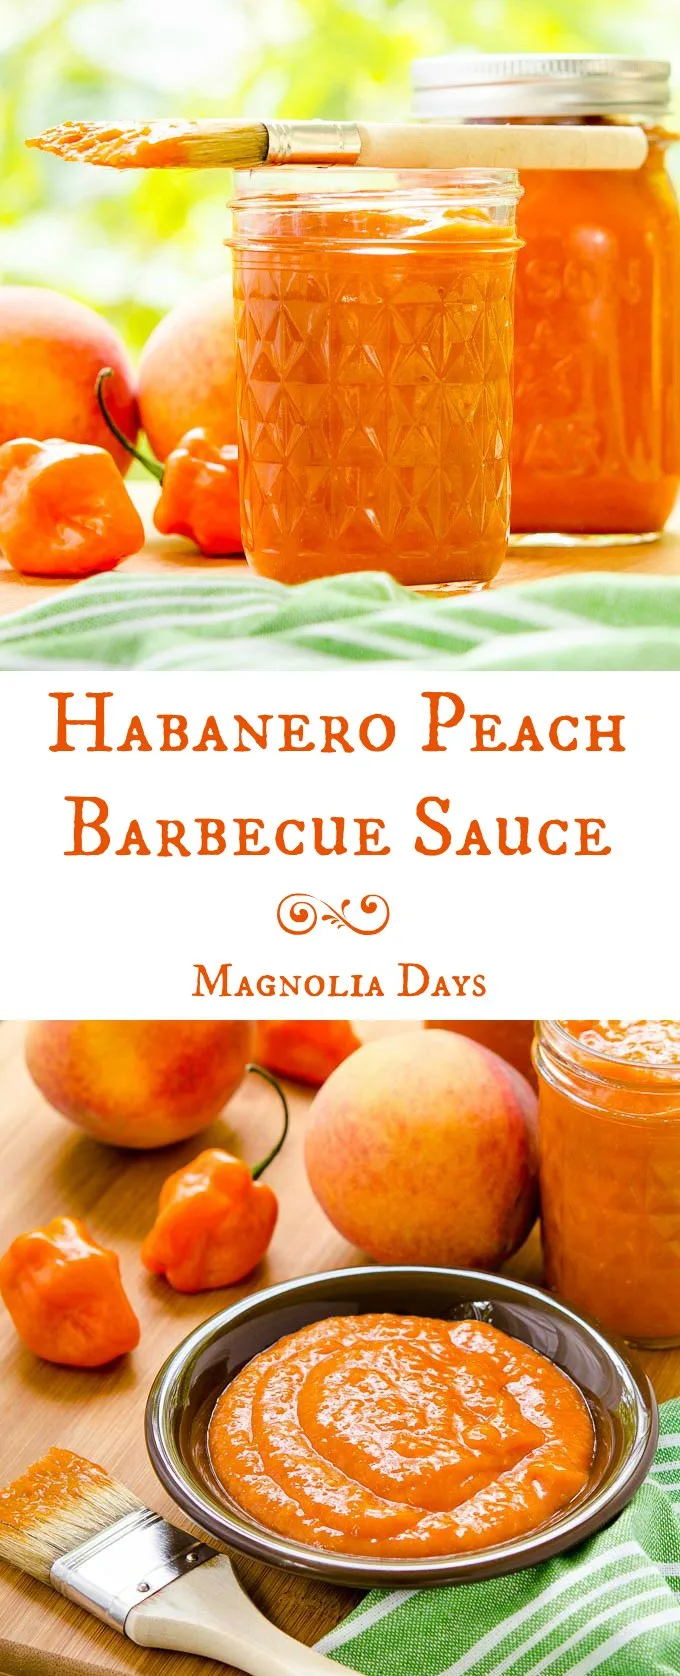 Homemade Habanero Peach Barbecue Sauce. Use it on pork, chicken, or seafood. It's thick, rich, fruity, sweet, and has a kick of heat from fresh peppers.